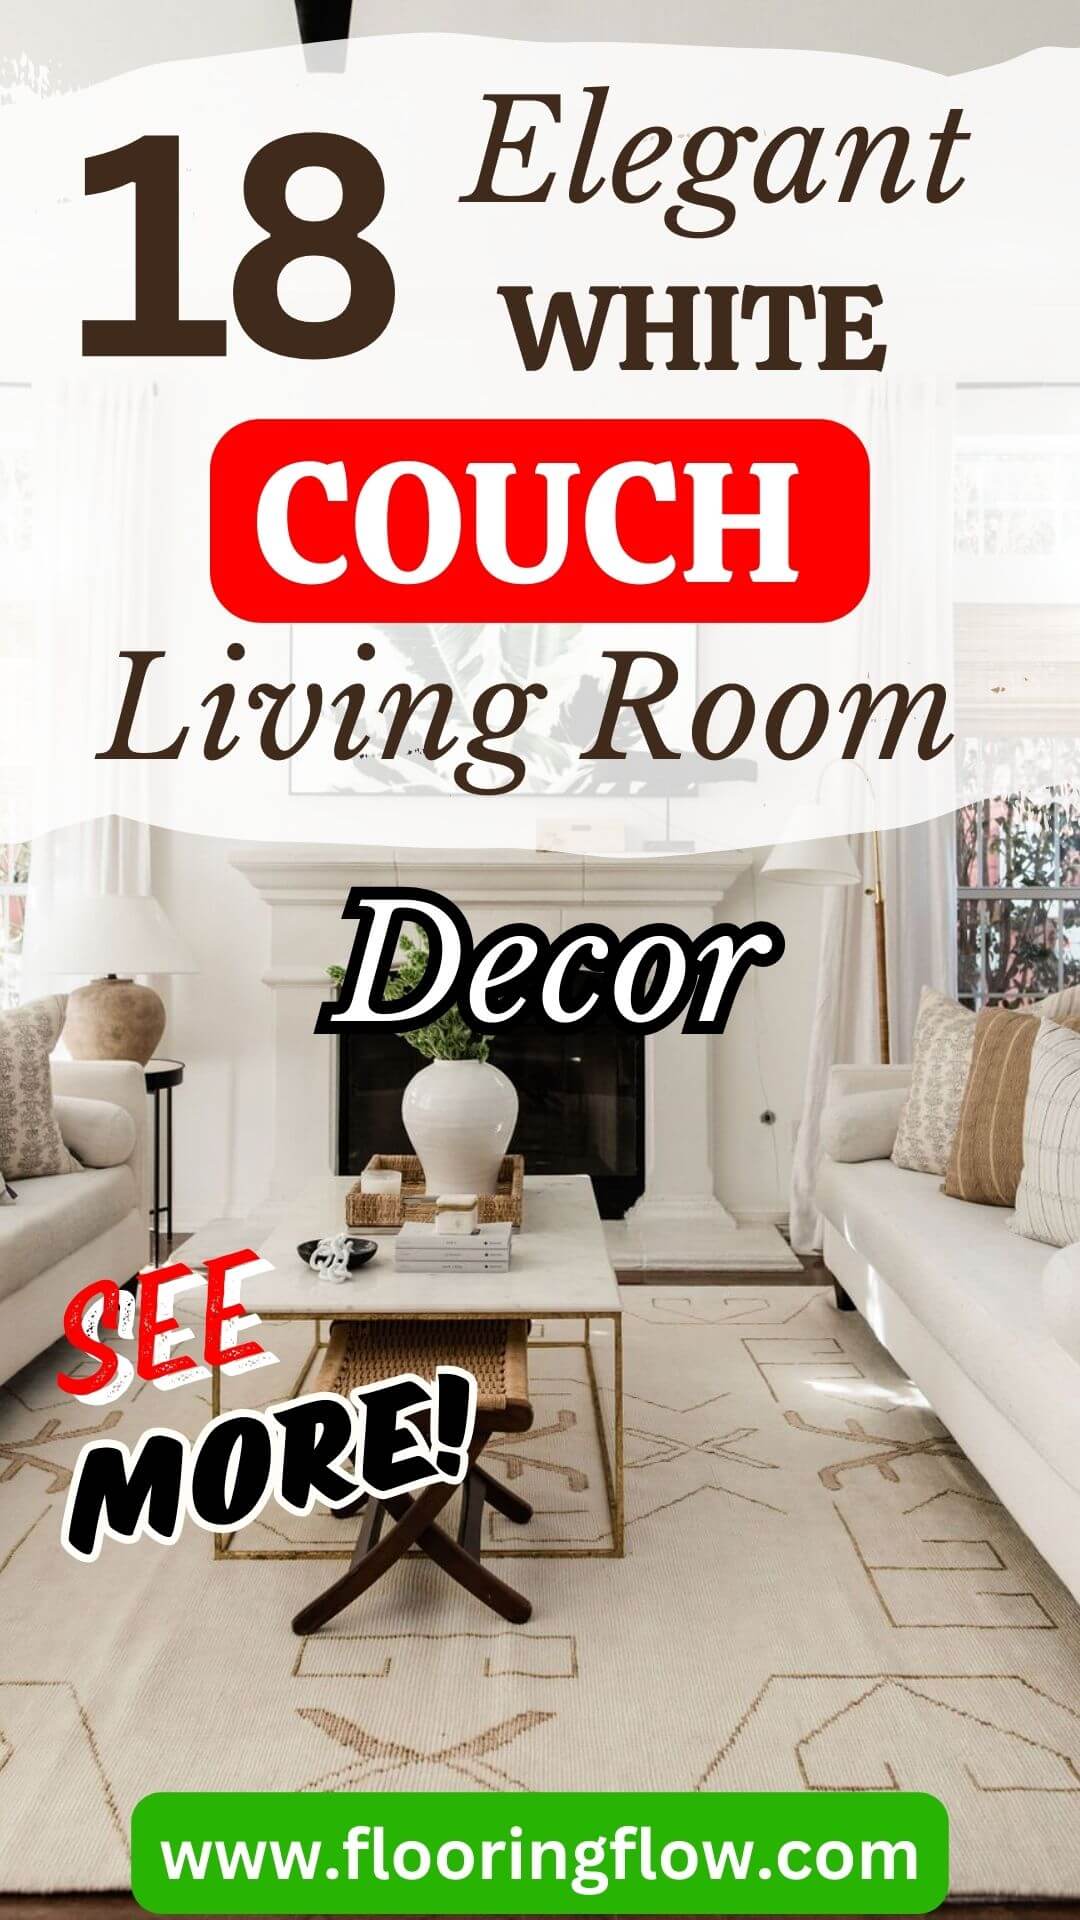 White Couch Living Room Decor Ideas